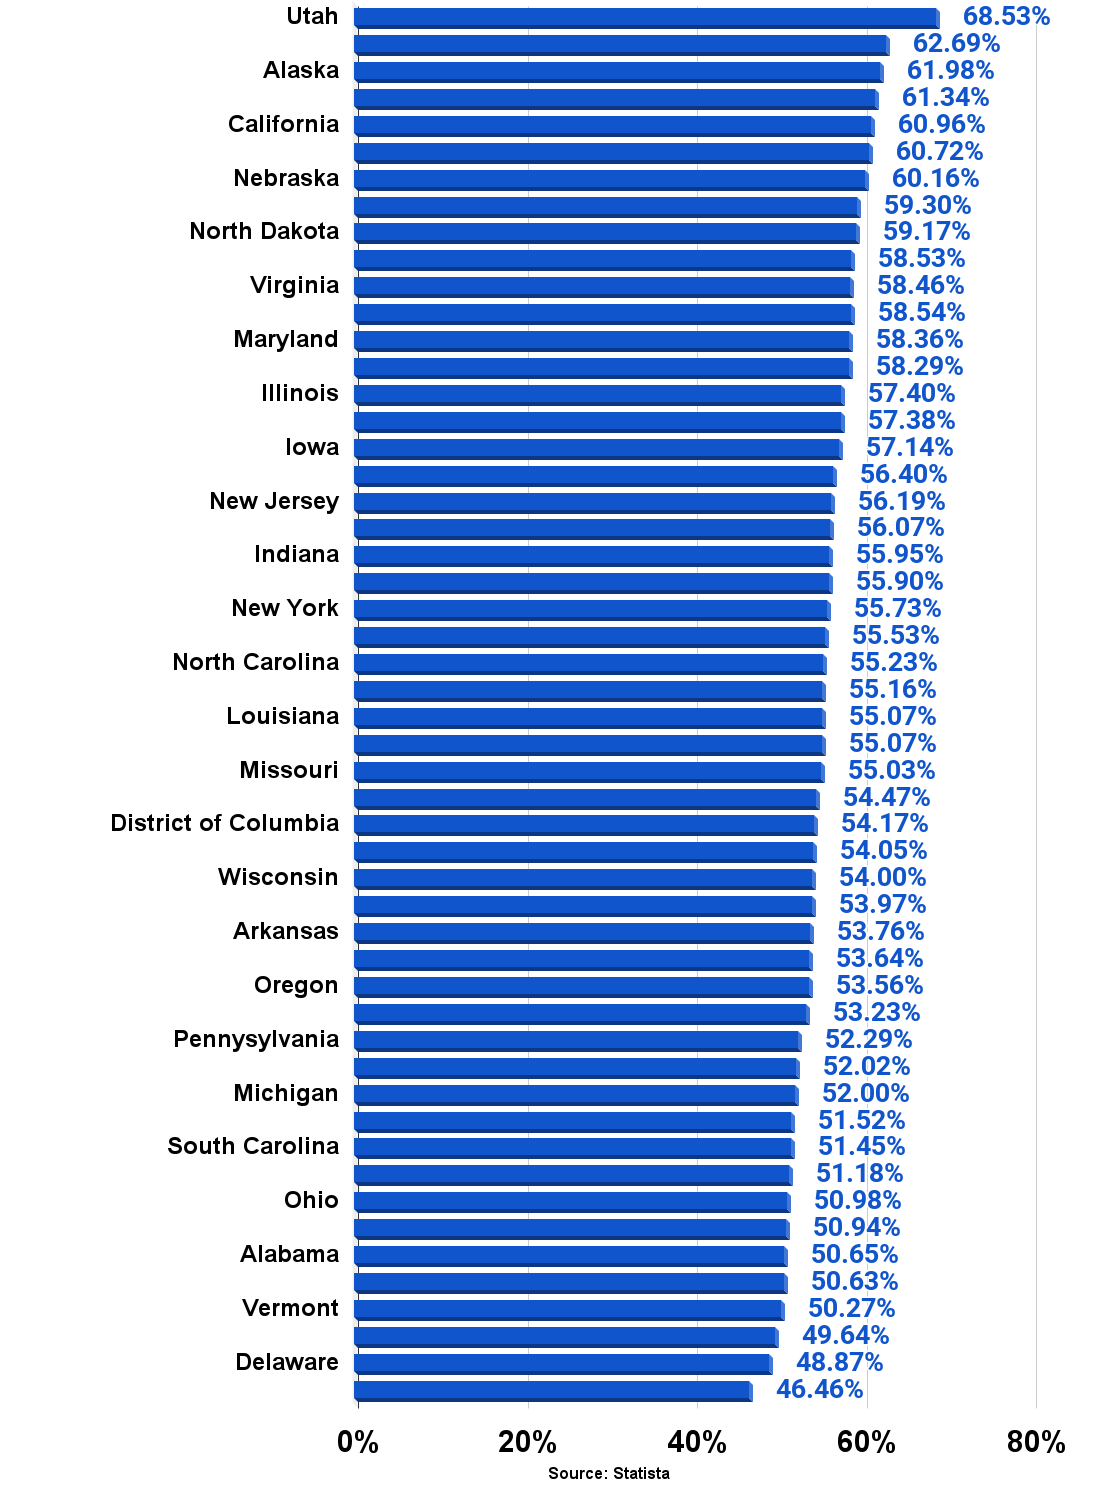 Percentage of husband-wife households with own children under 18 years in the U.S. in 2018, by State. Source Statista